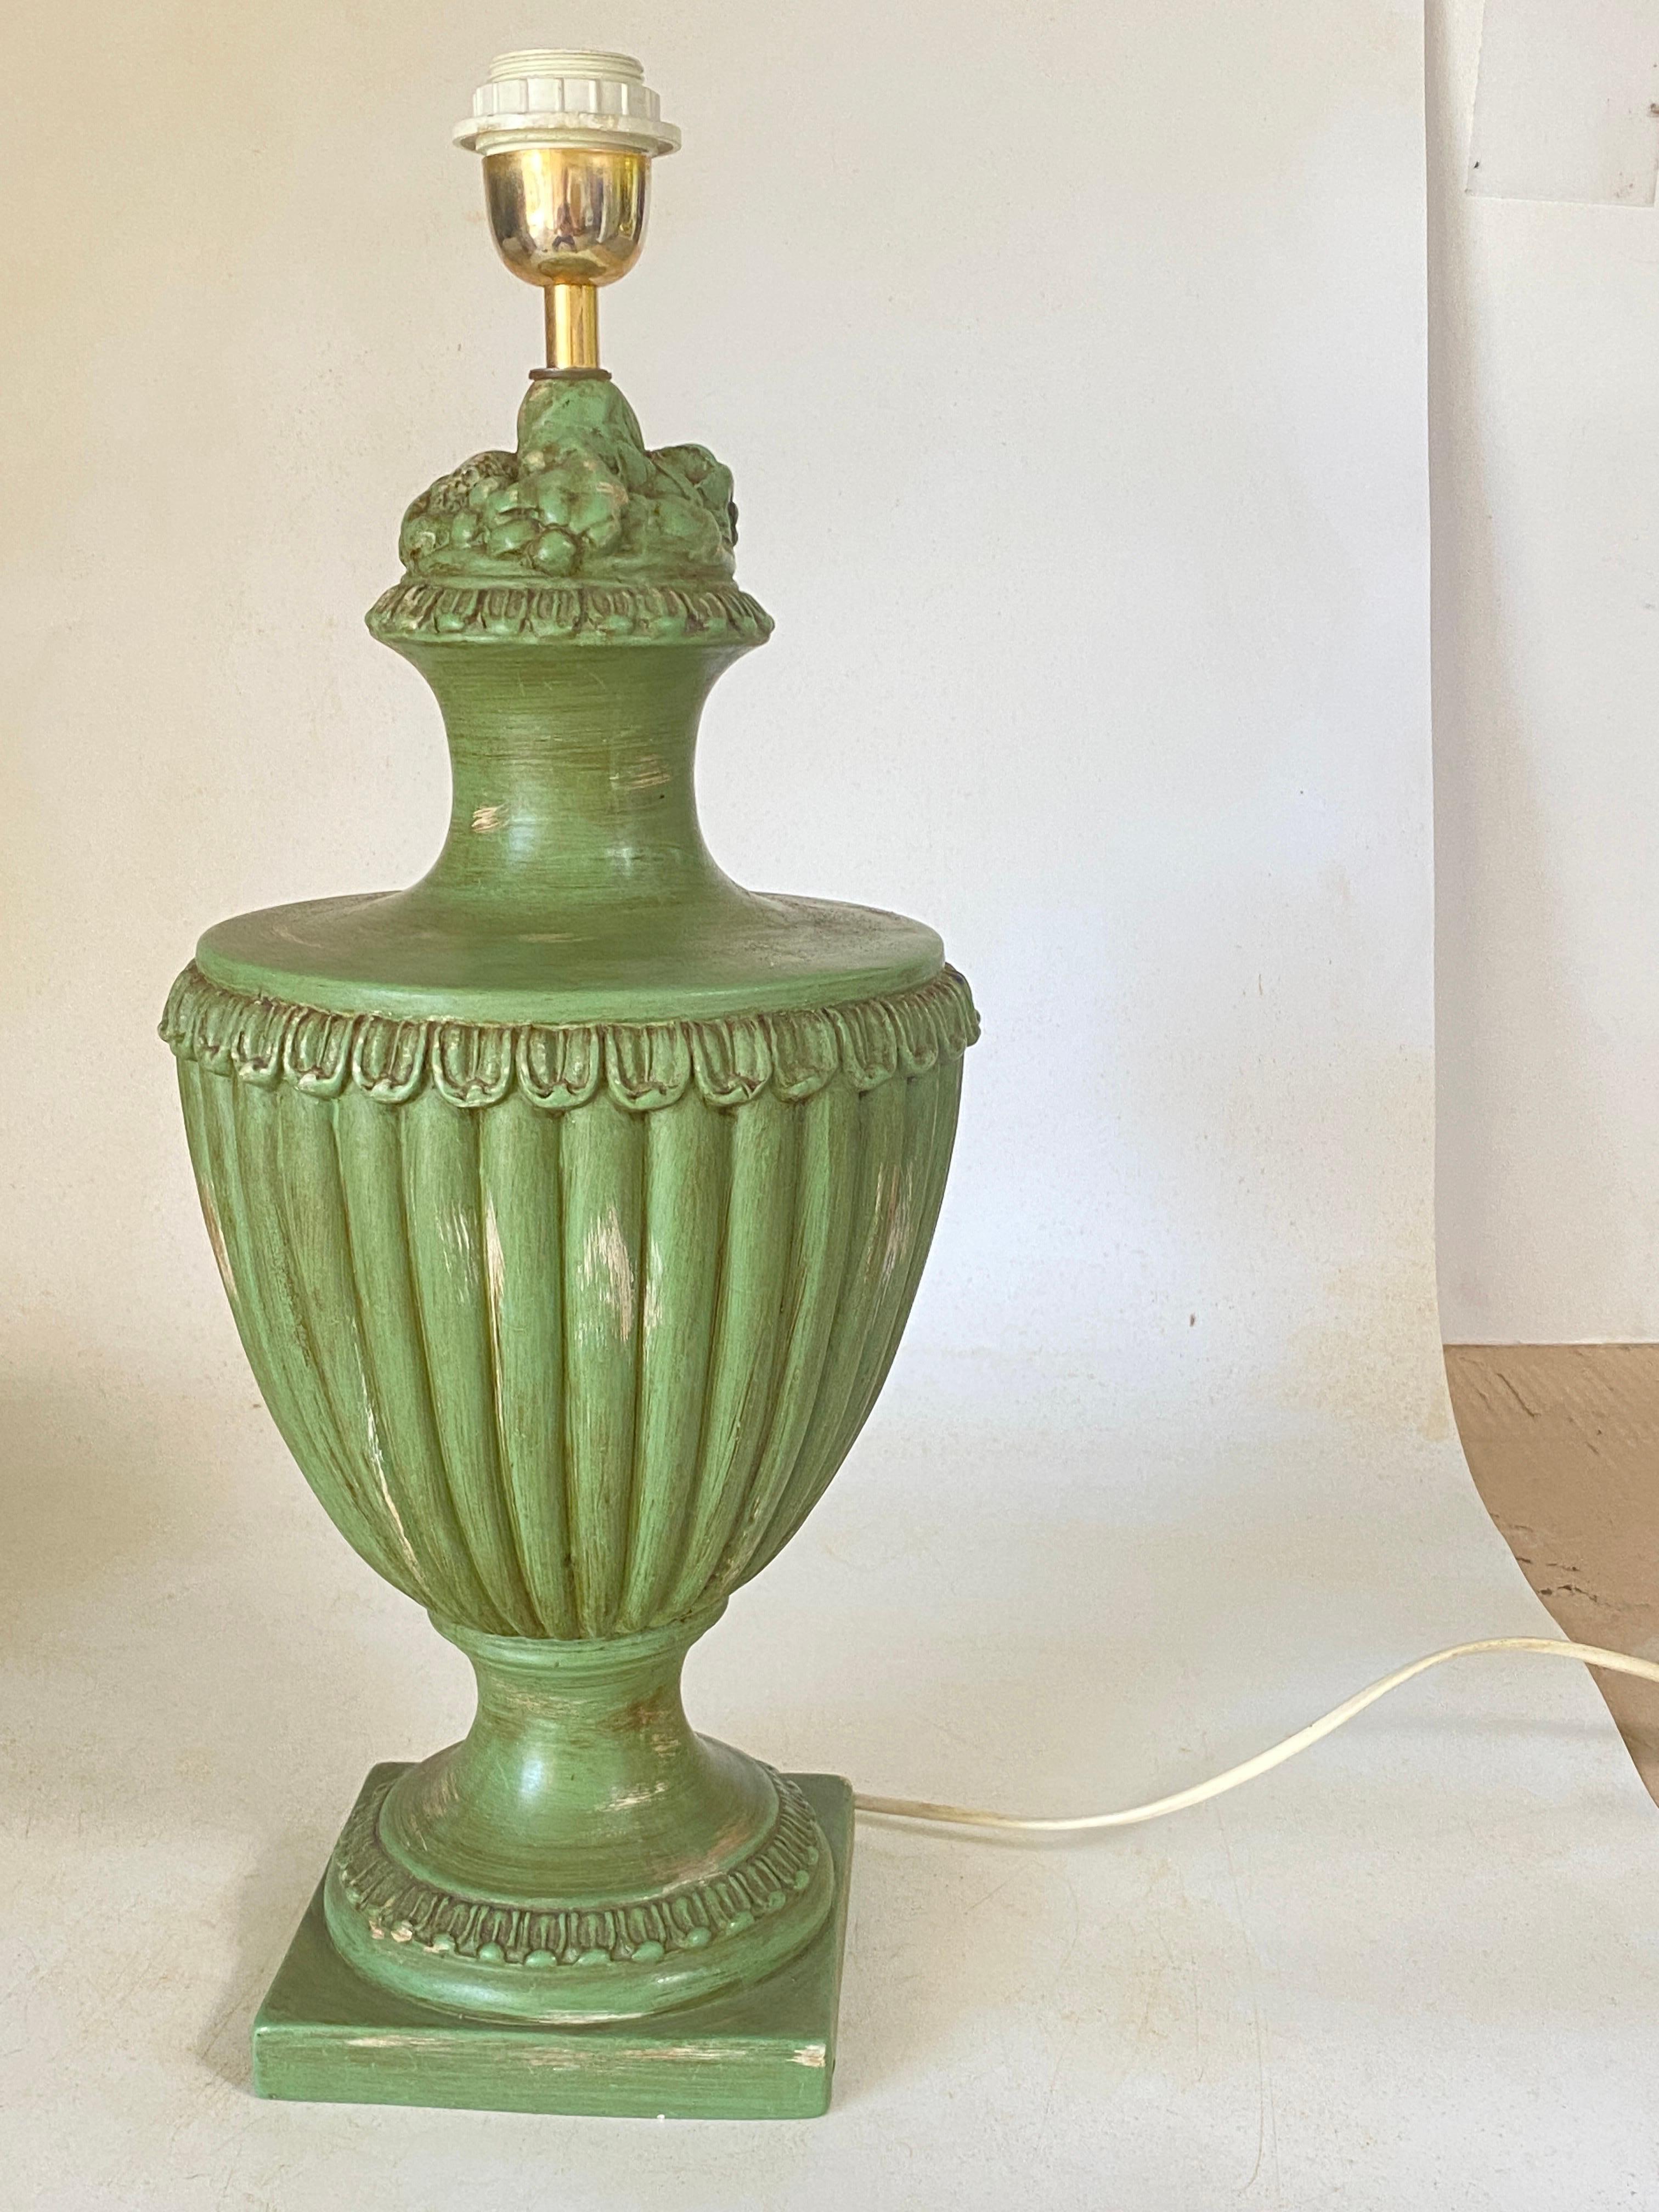 Table Lamp in old patinated Ceramic Green color France 1970 Signed Lancel Paris For Sale 8